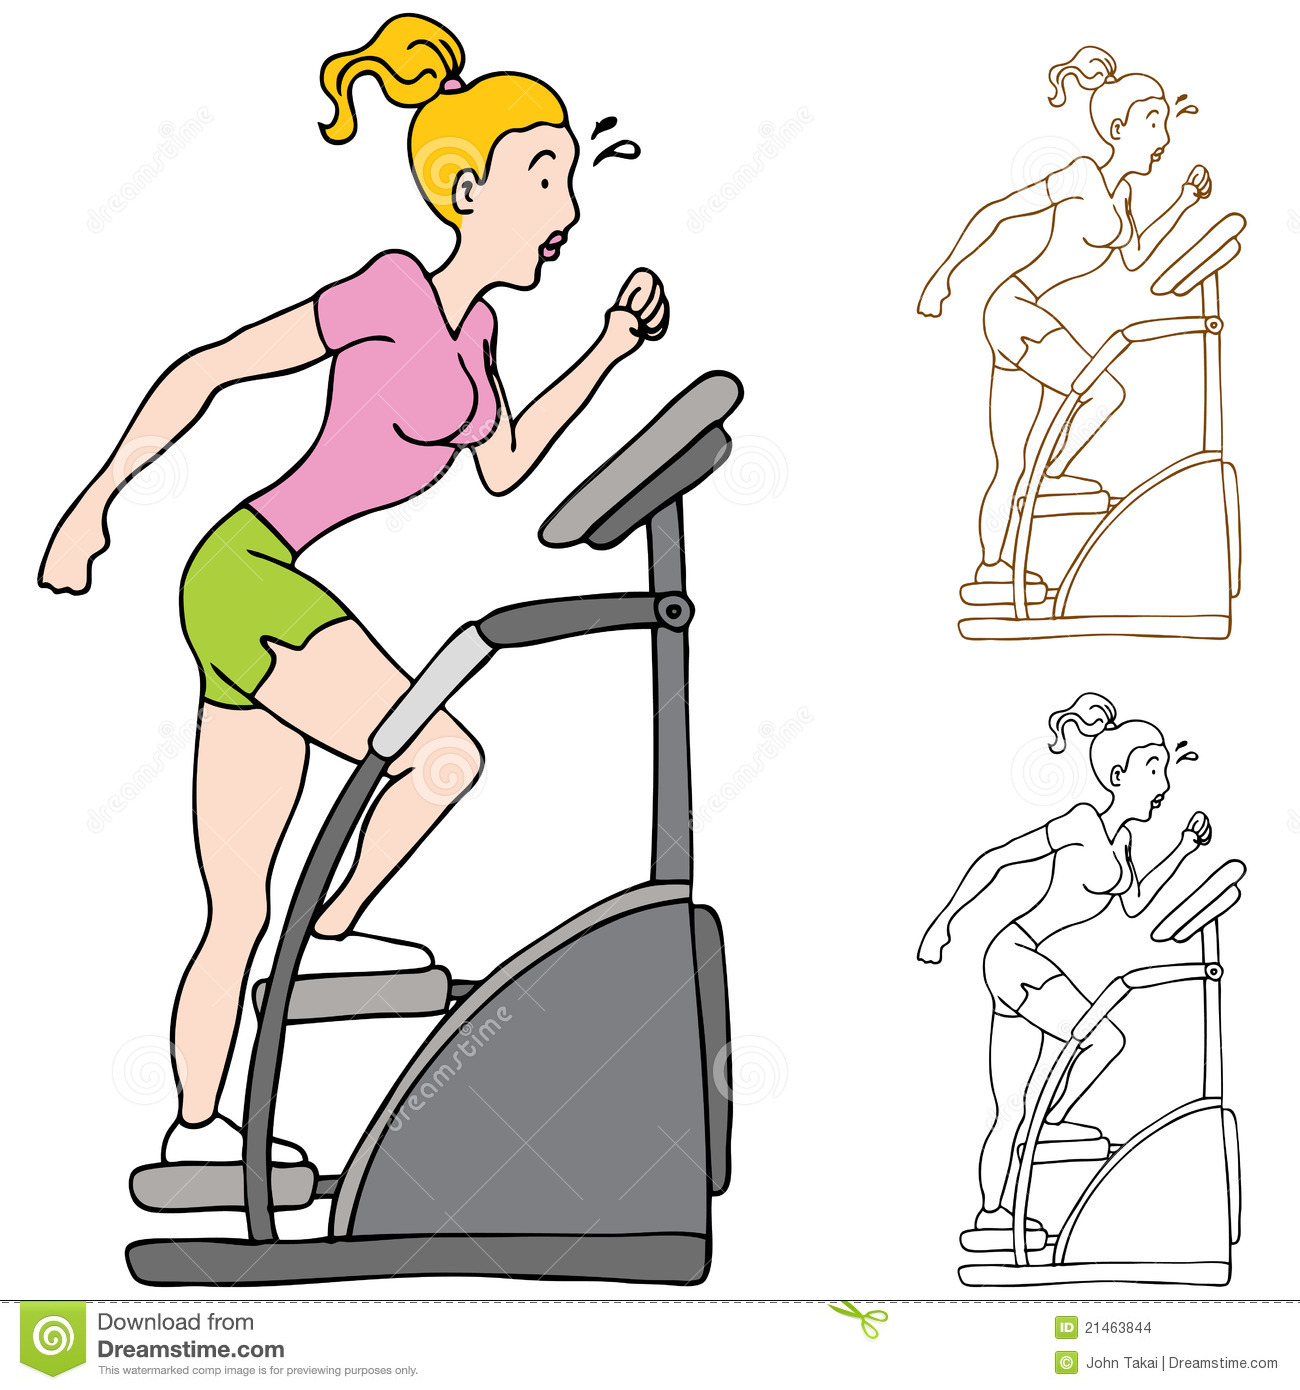 Of A Woman Exercising On A Stairclimbing Machine Mr No Pr No 2 1099 3